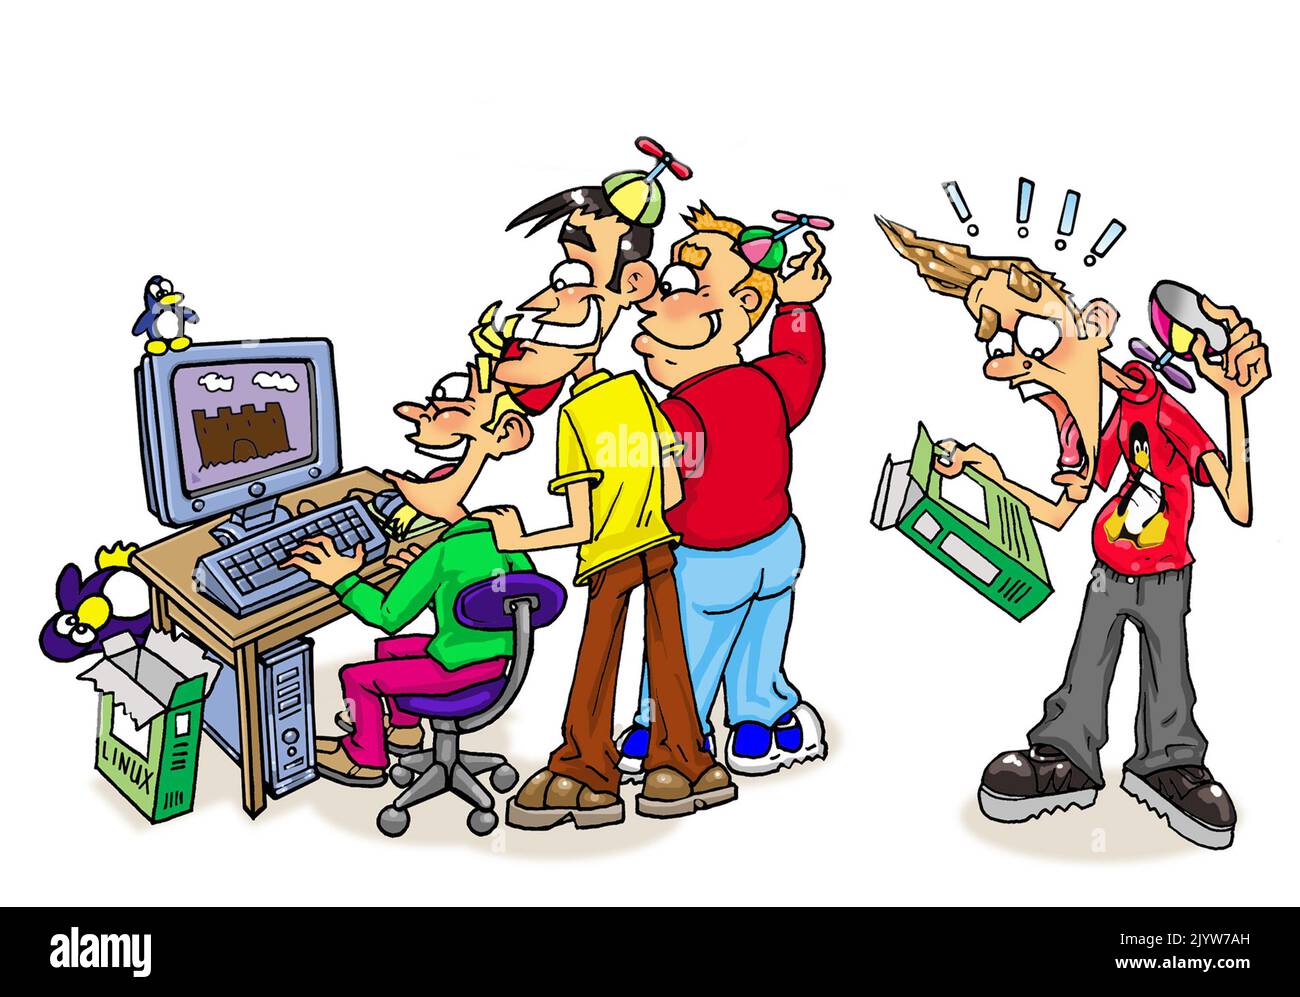 Cartoon group of men enjoying computer game, one propeller head geek is excited by the game, or upset at the technical specifications needed to run it Stock Photo